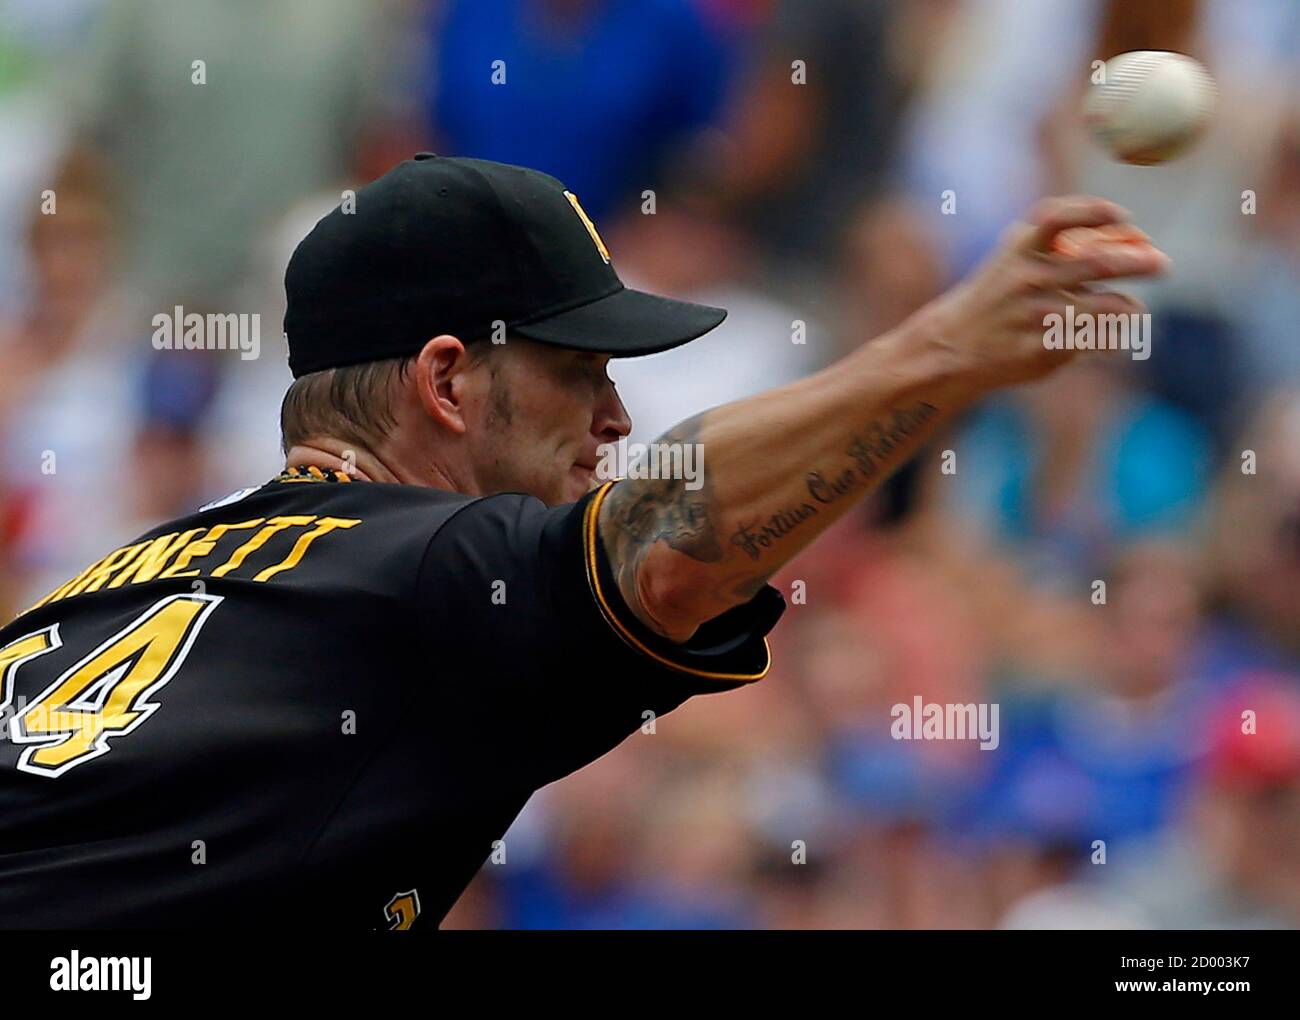 Pittsburgh Pirates A J Burnett Pitches Against The Chicago Cubs During The First Inning Of Their National League Mlb Baseball Game In Chicago Illinois July 7 13 Reuters Jim Young United States s